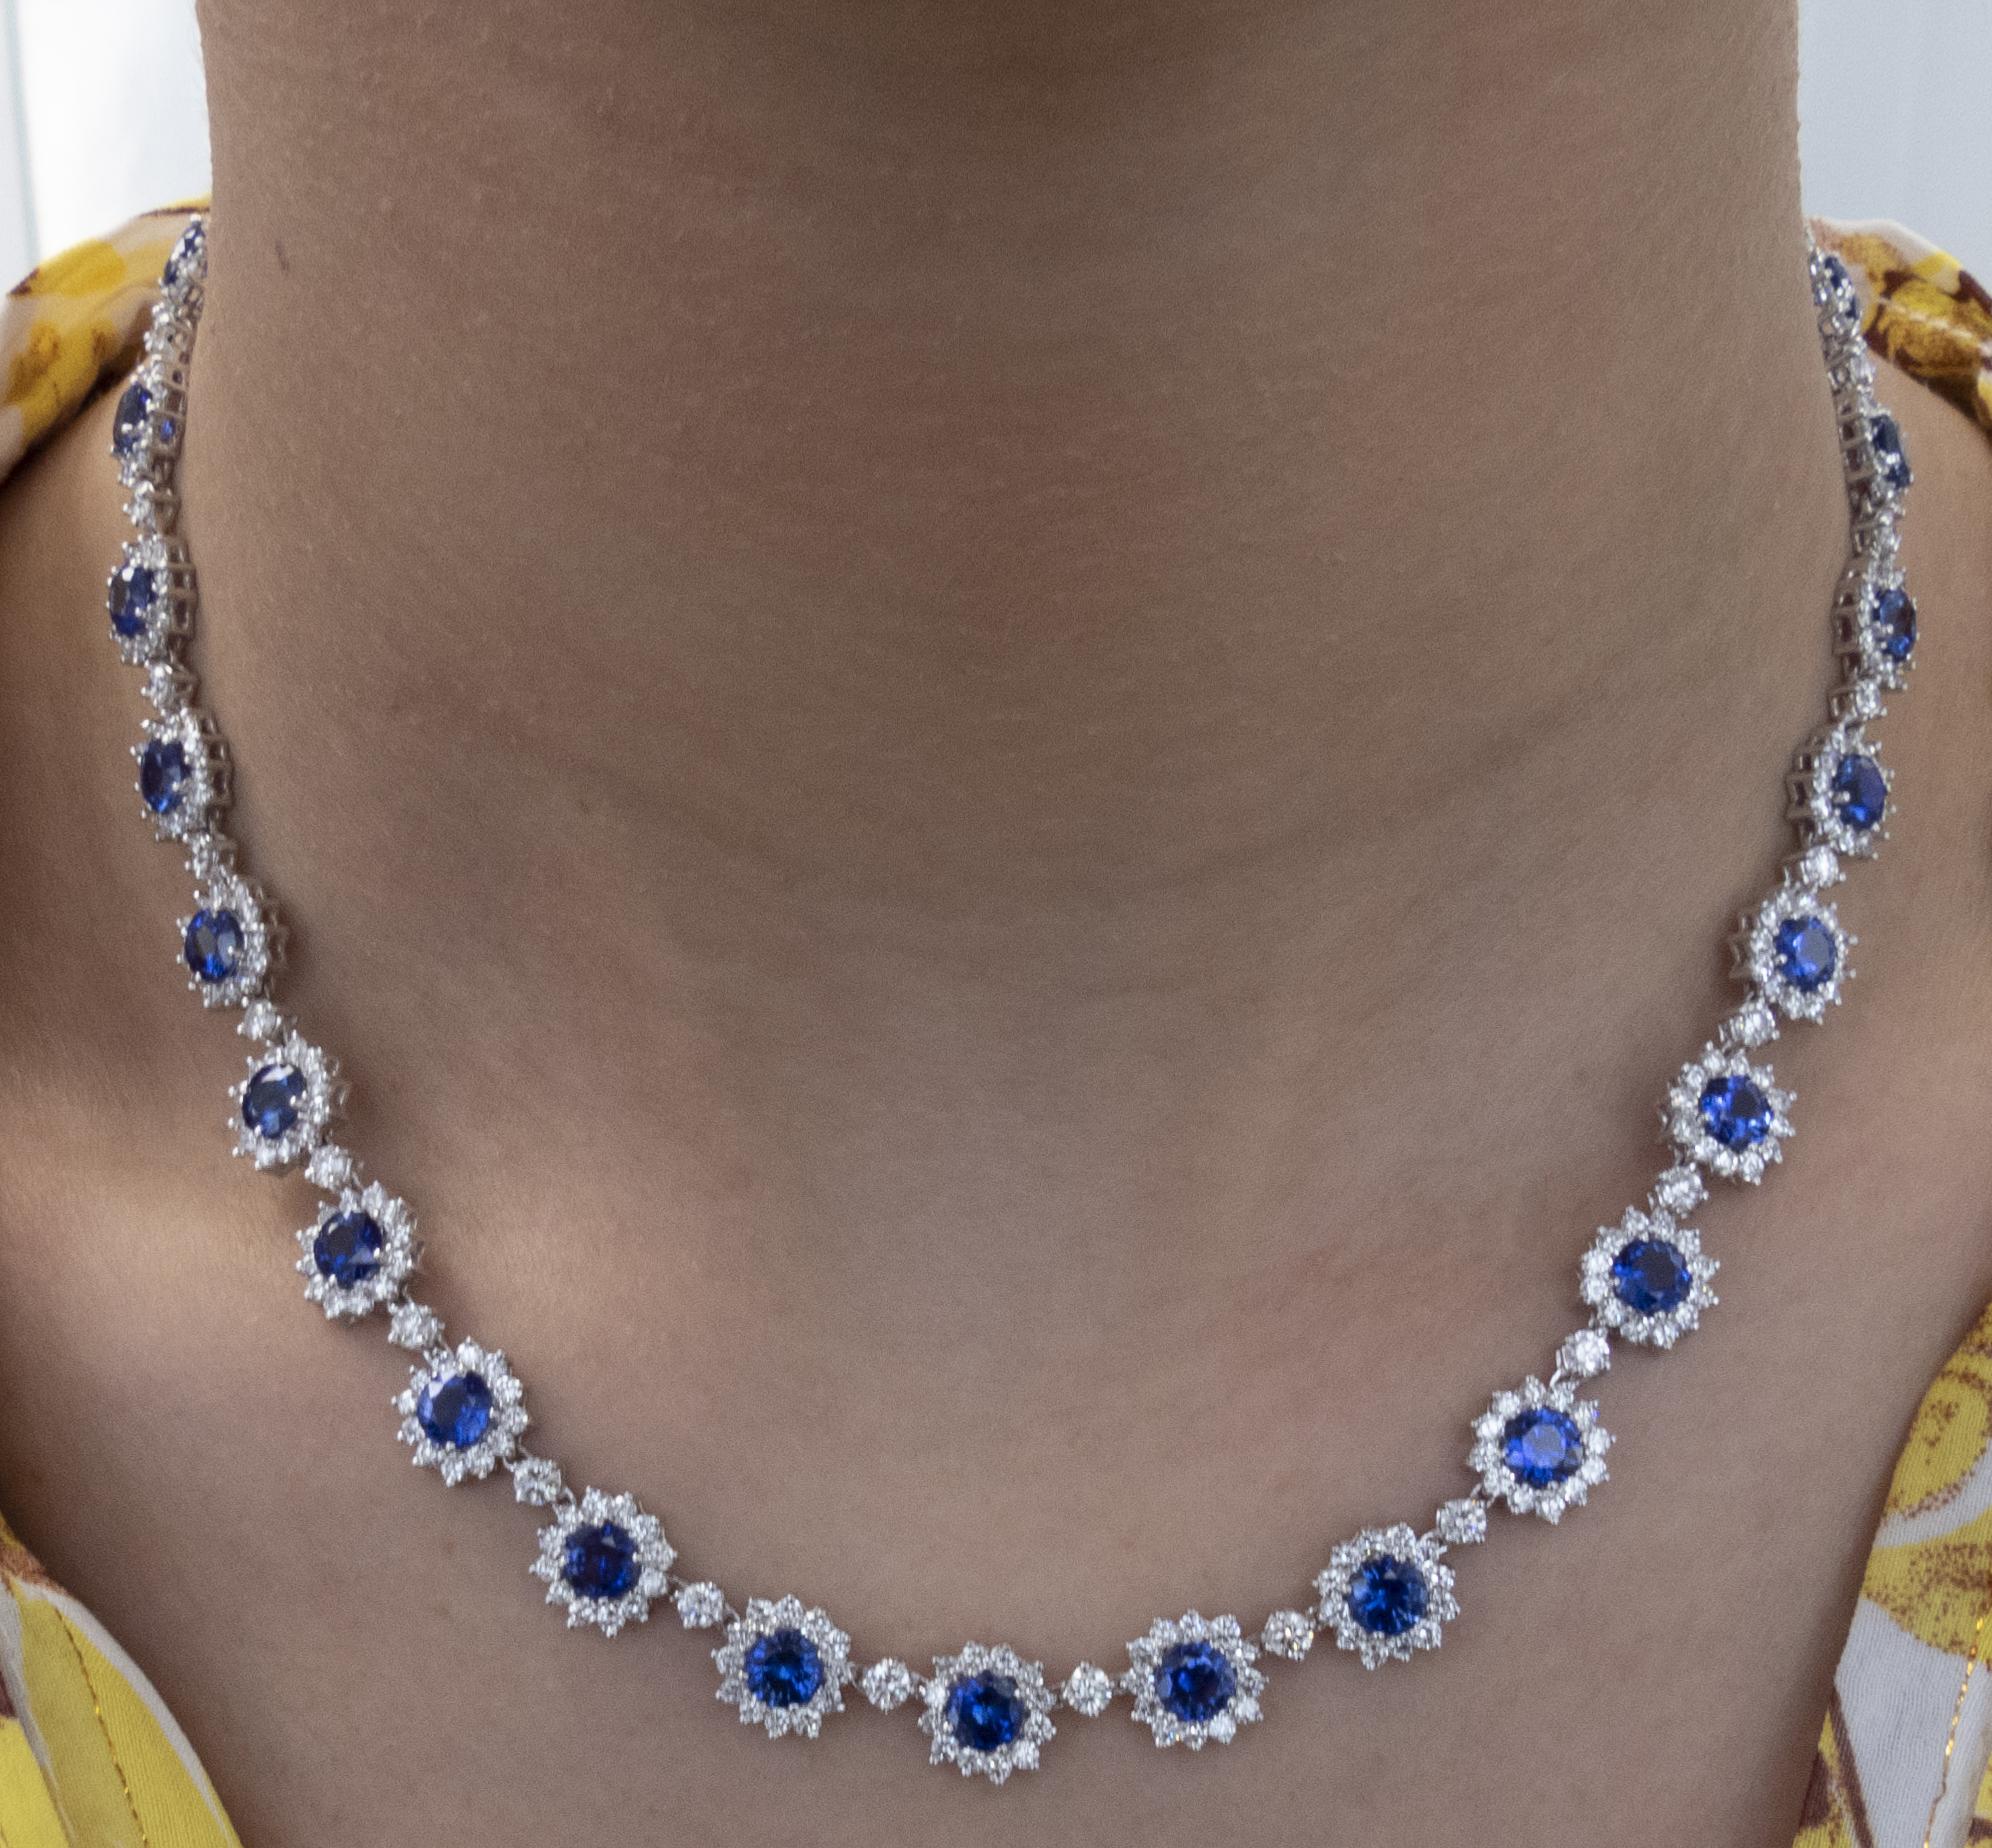 Sensational Diamond and Sapphire necklace finely crafted in 18K white gold, featuring Blue Sapphires and white diamonds weighing approximately 33.34 carats total. This exceptional necklace showcases 416 round brilliant cut diamonds weighing 21.79